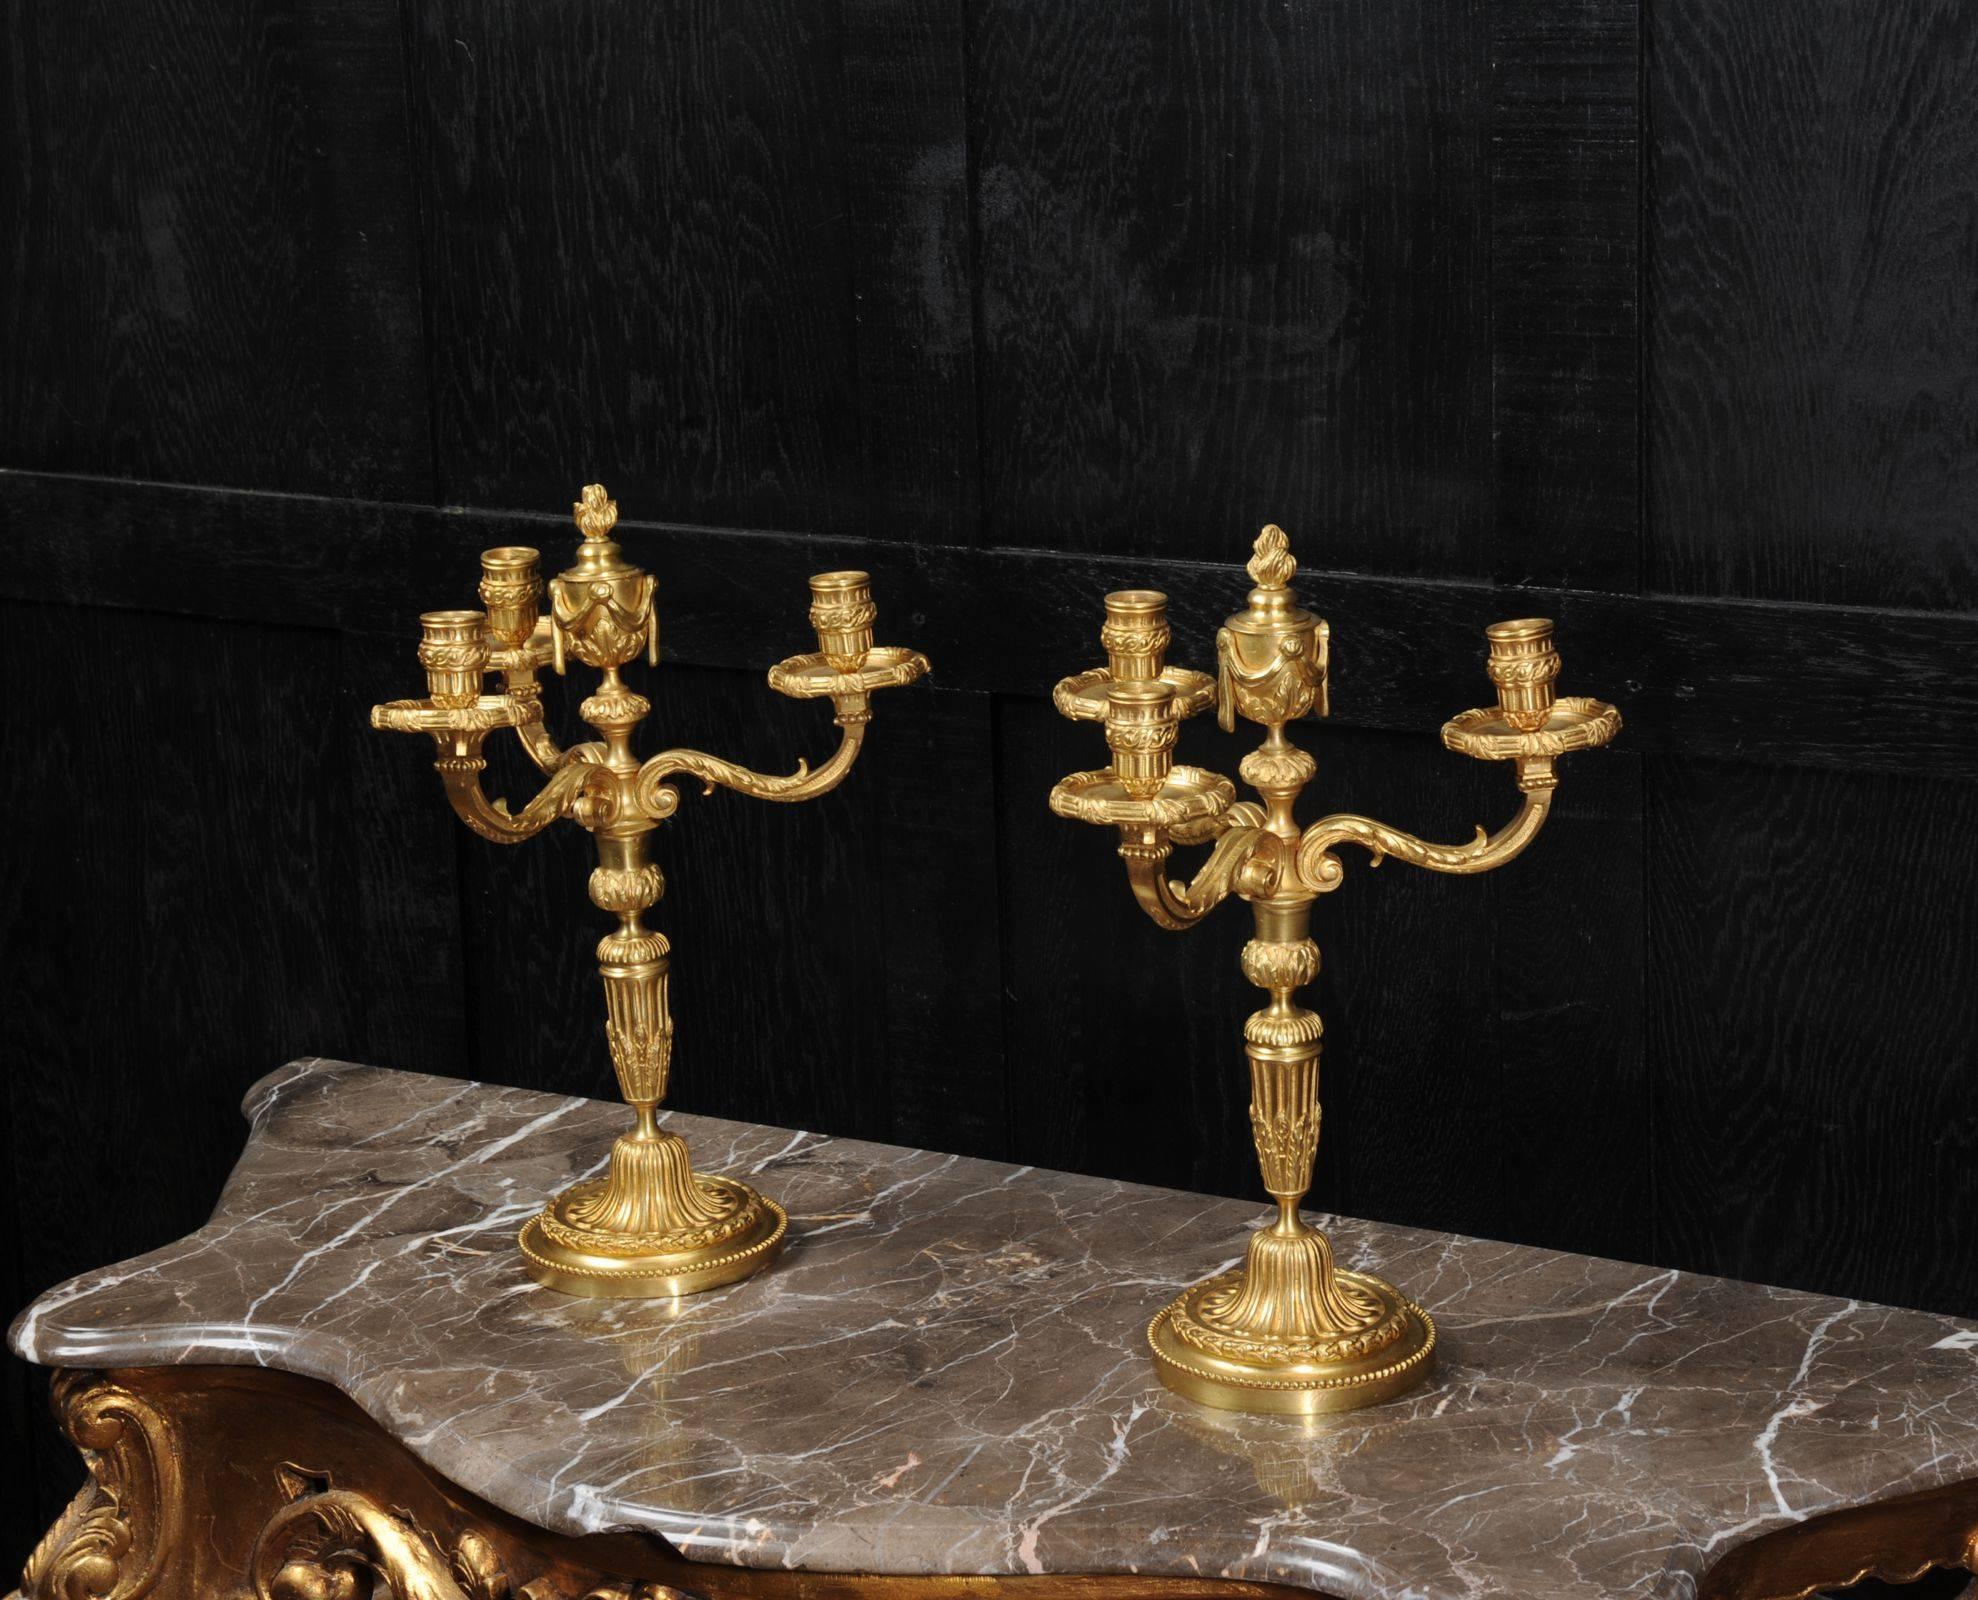 A stunning pair of gilt bronze candelabra, French dating from circa 1880. They are neoclassical in design with three branches of stylised acanthus from the reeded column support, standing on a domed base. To the centre a snuffer with flame finial.